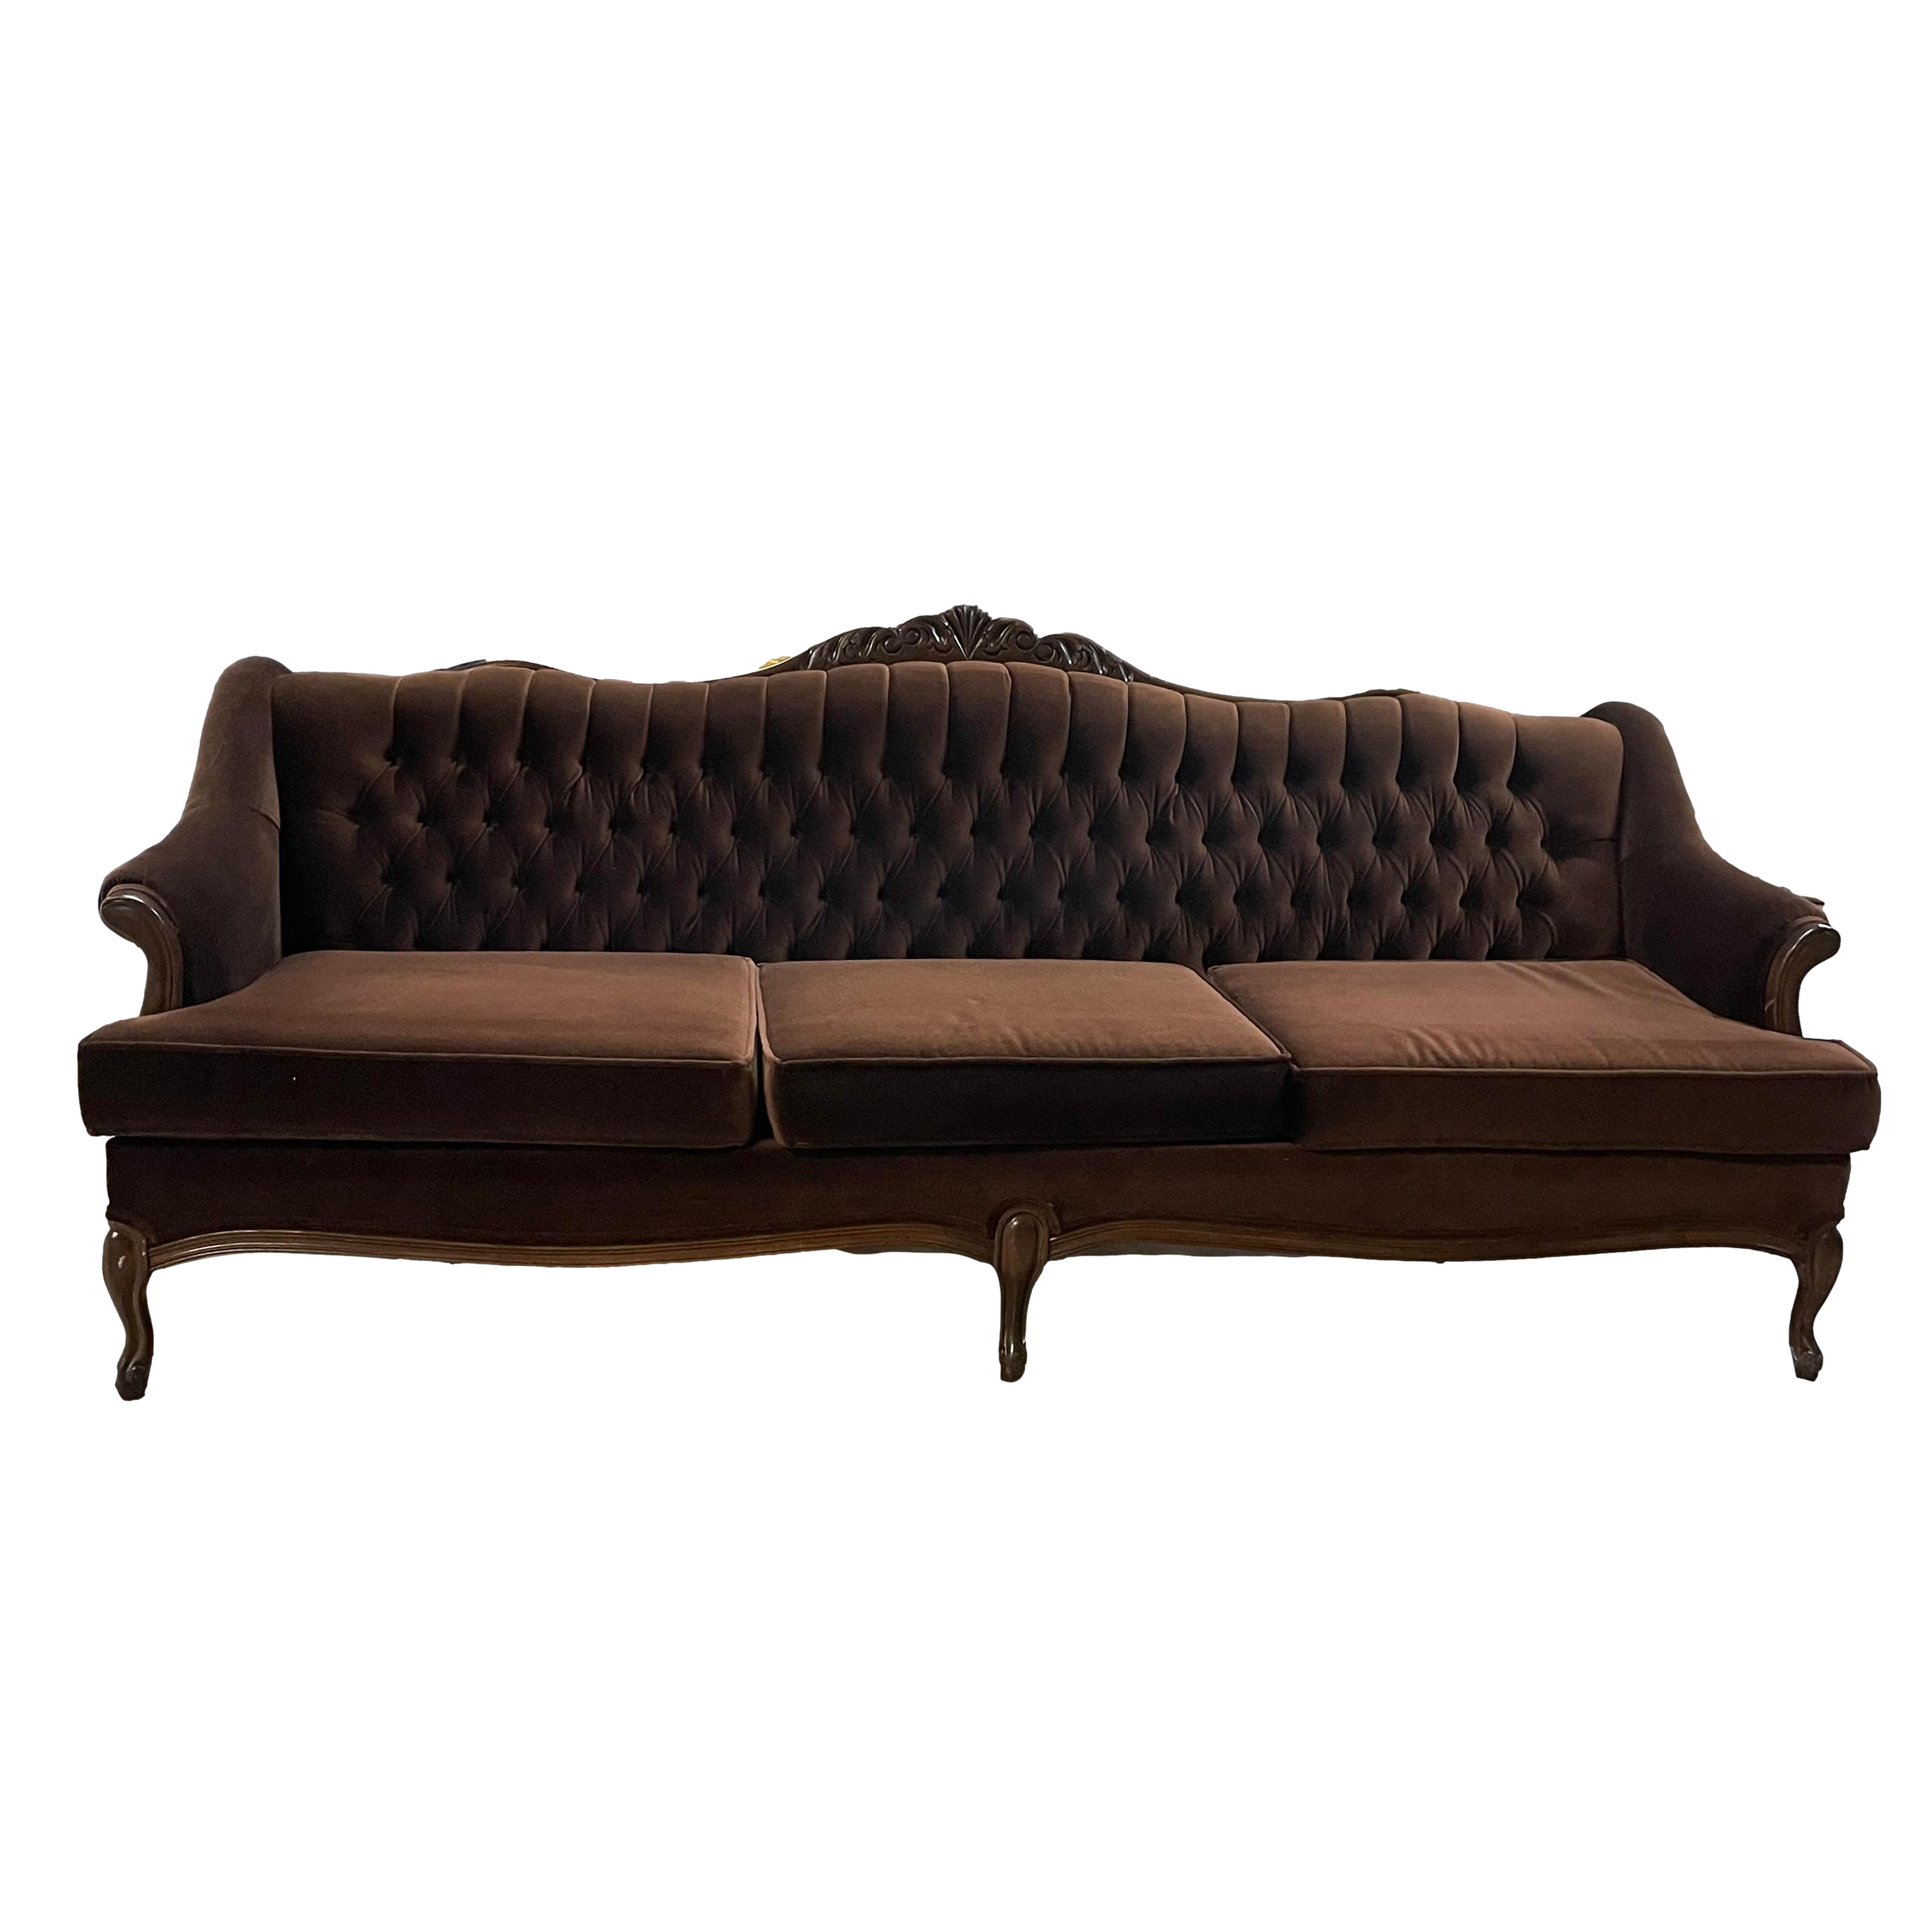 SOFABEAT_clipped_rev_1.png